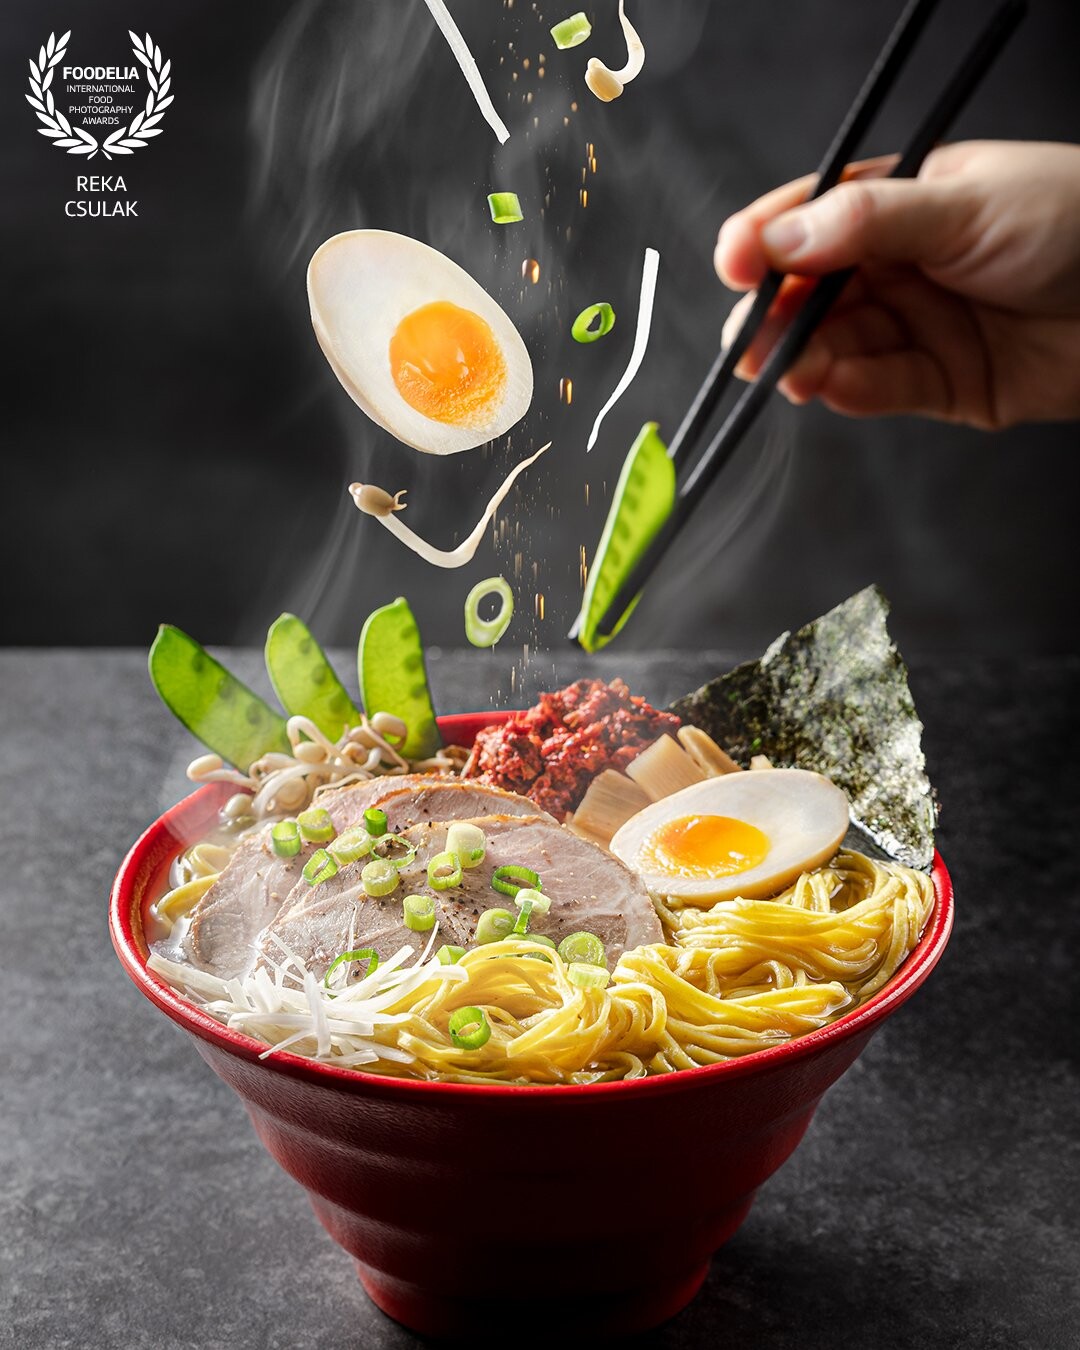 This has been a photo that ended up on a restaurant banner of the Client. It is taller than I am, and already in front of the place :) I wanted to show a cool action with this delicious ramen.